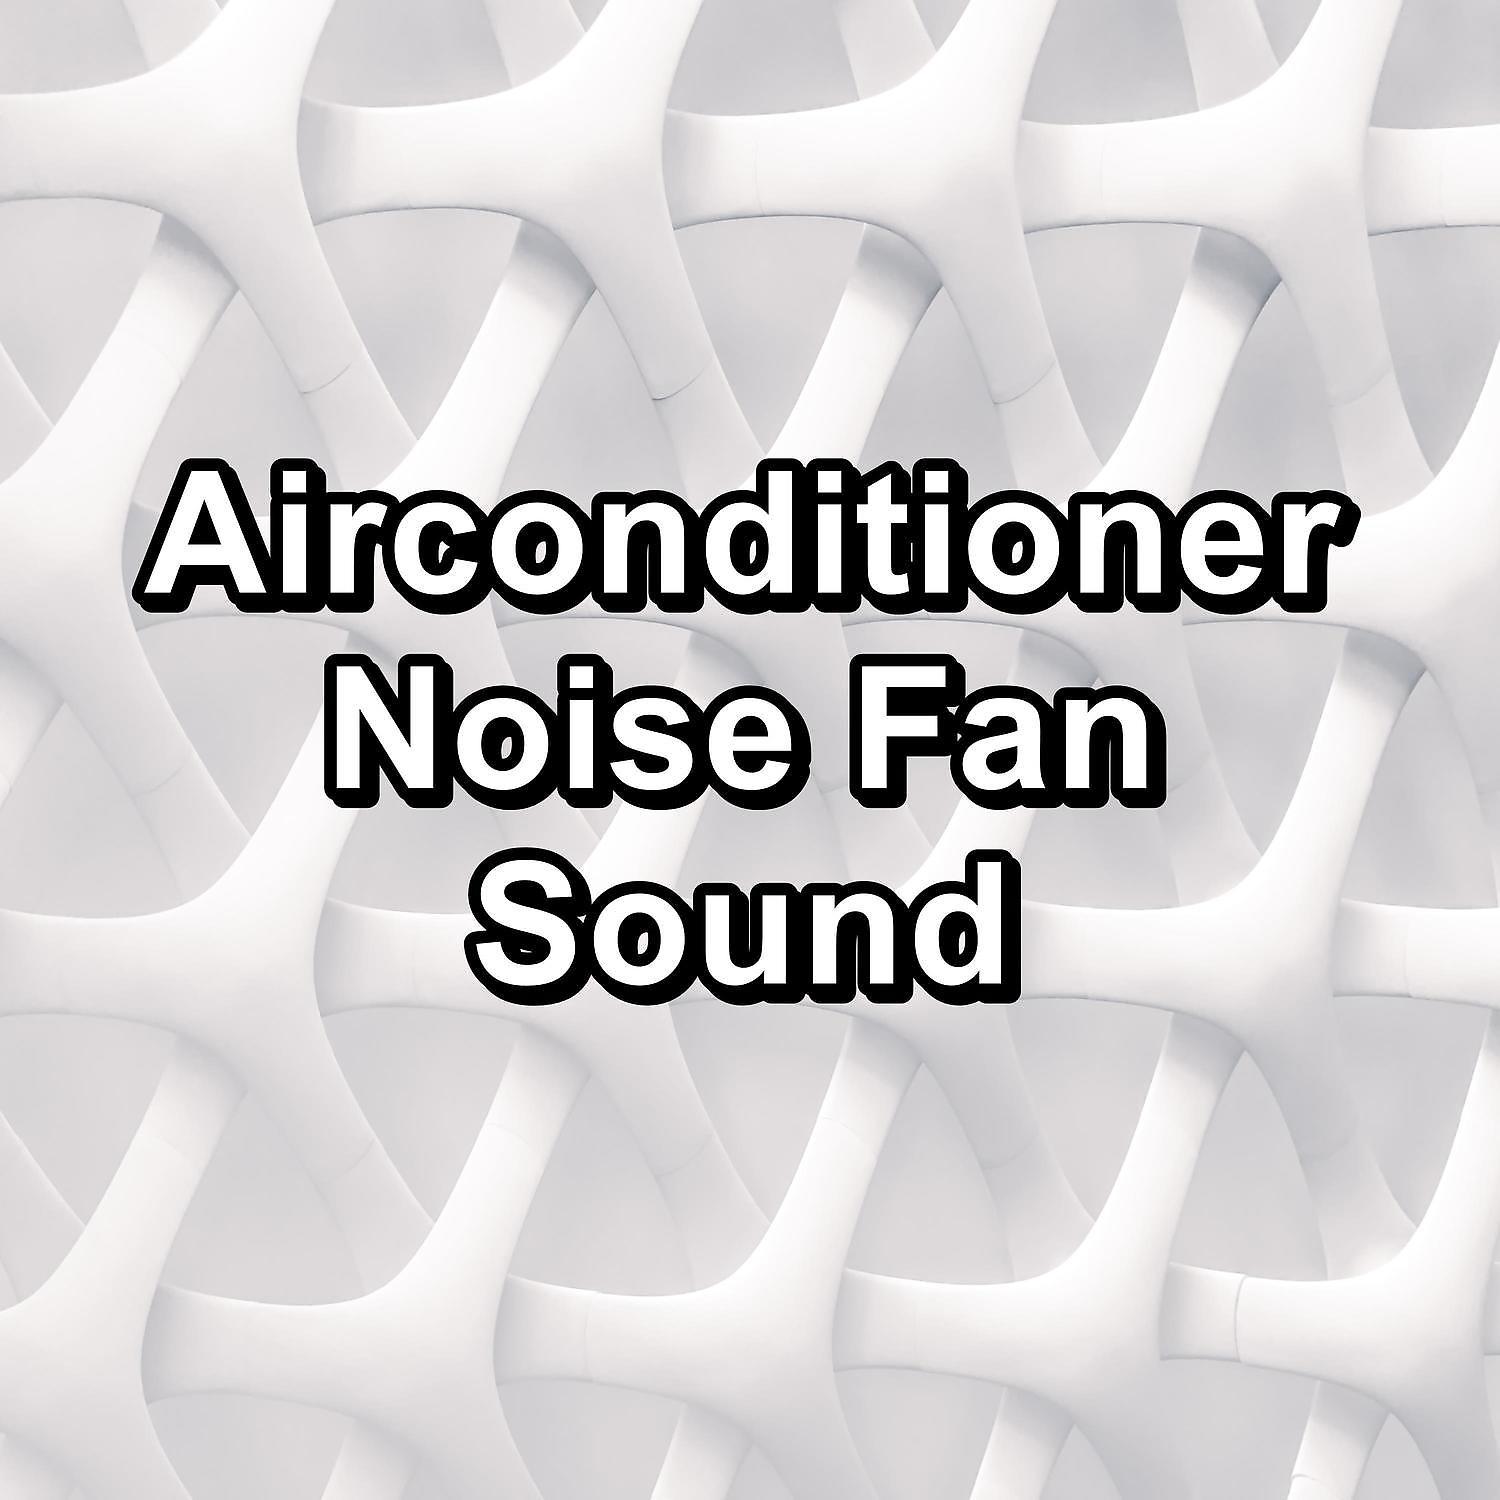 Brown Noise Sound, White Noise Sound, Pink Noise Sound - Hard White Noise Hair Dryer Best Sound to Loop